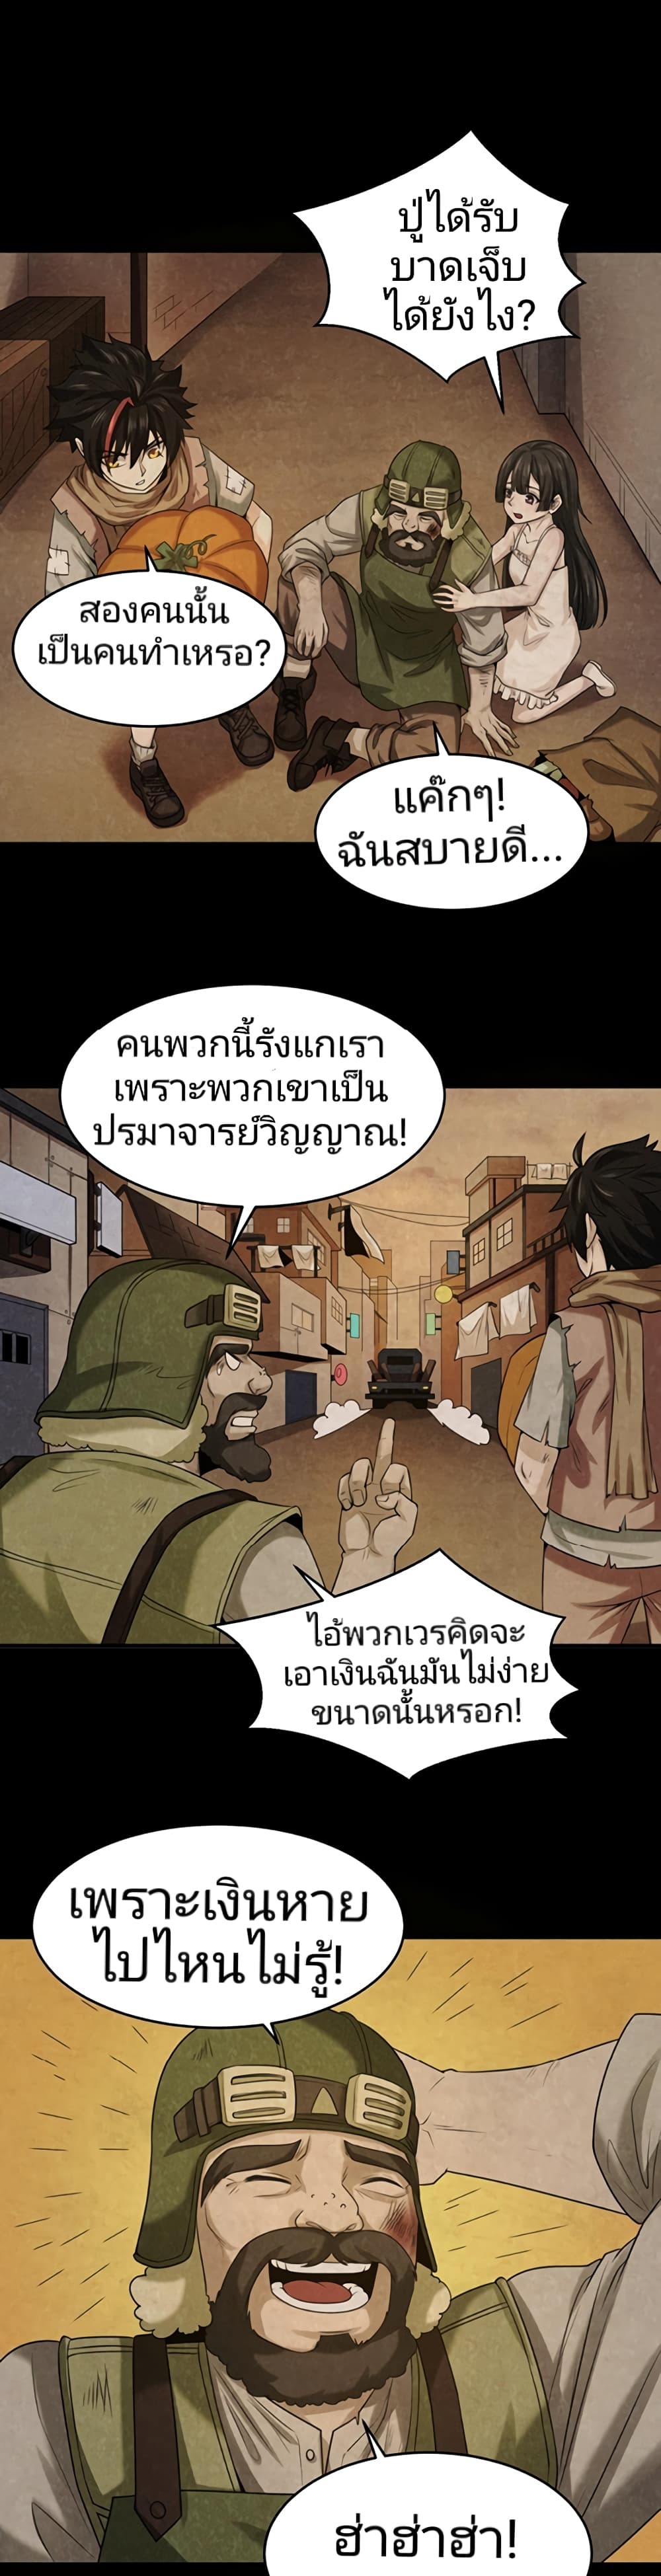 The Age of Ghost Spirits à¸à¸­à¸à¸à¸µà¹ 32 (11)